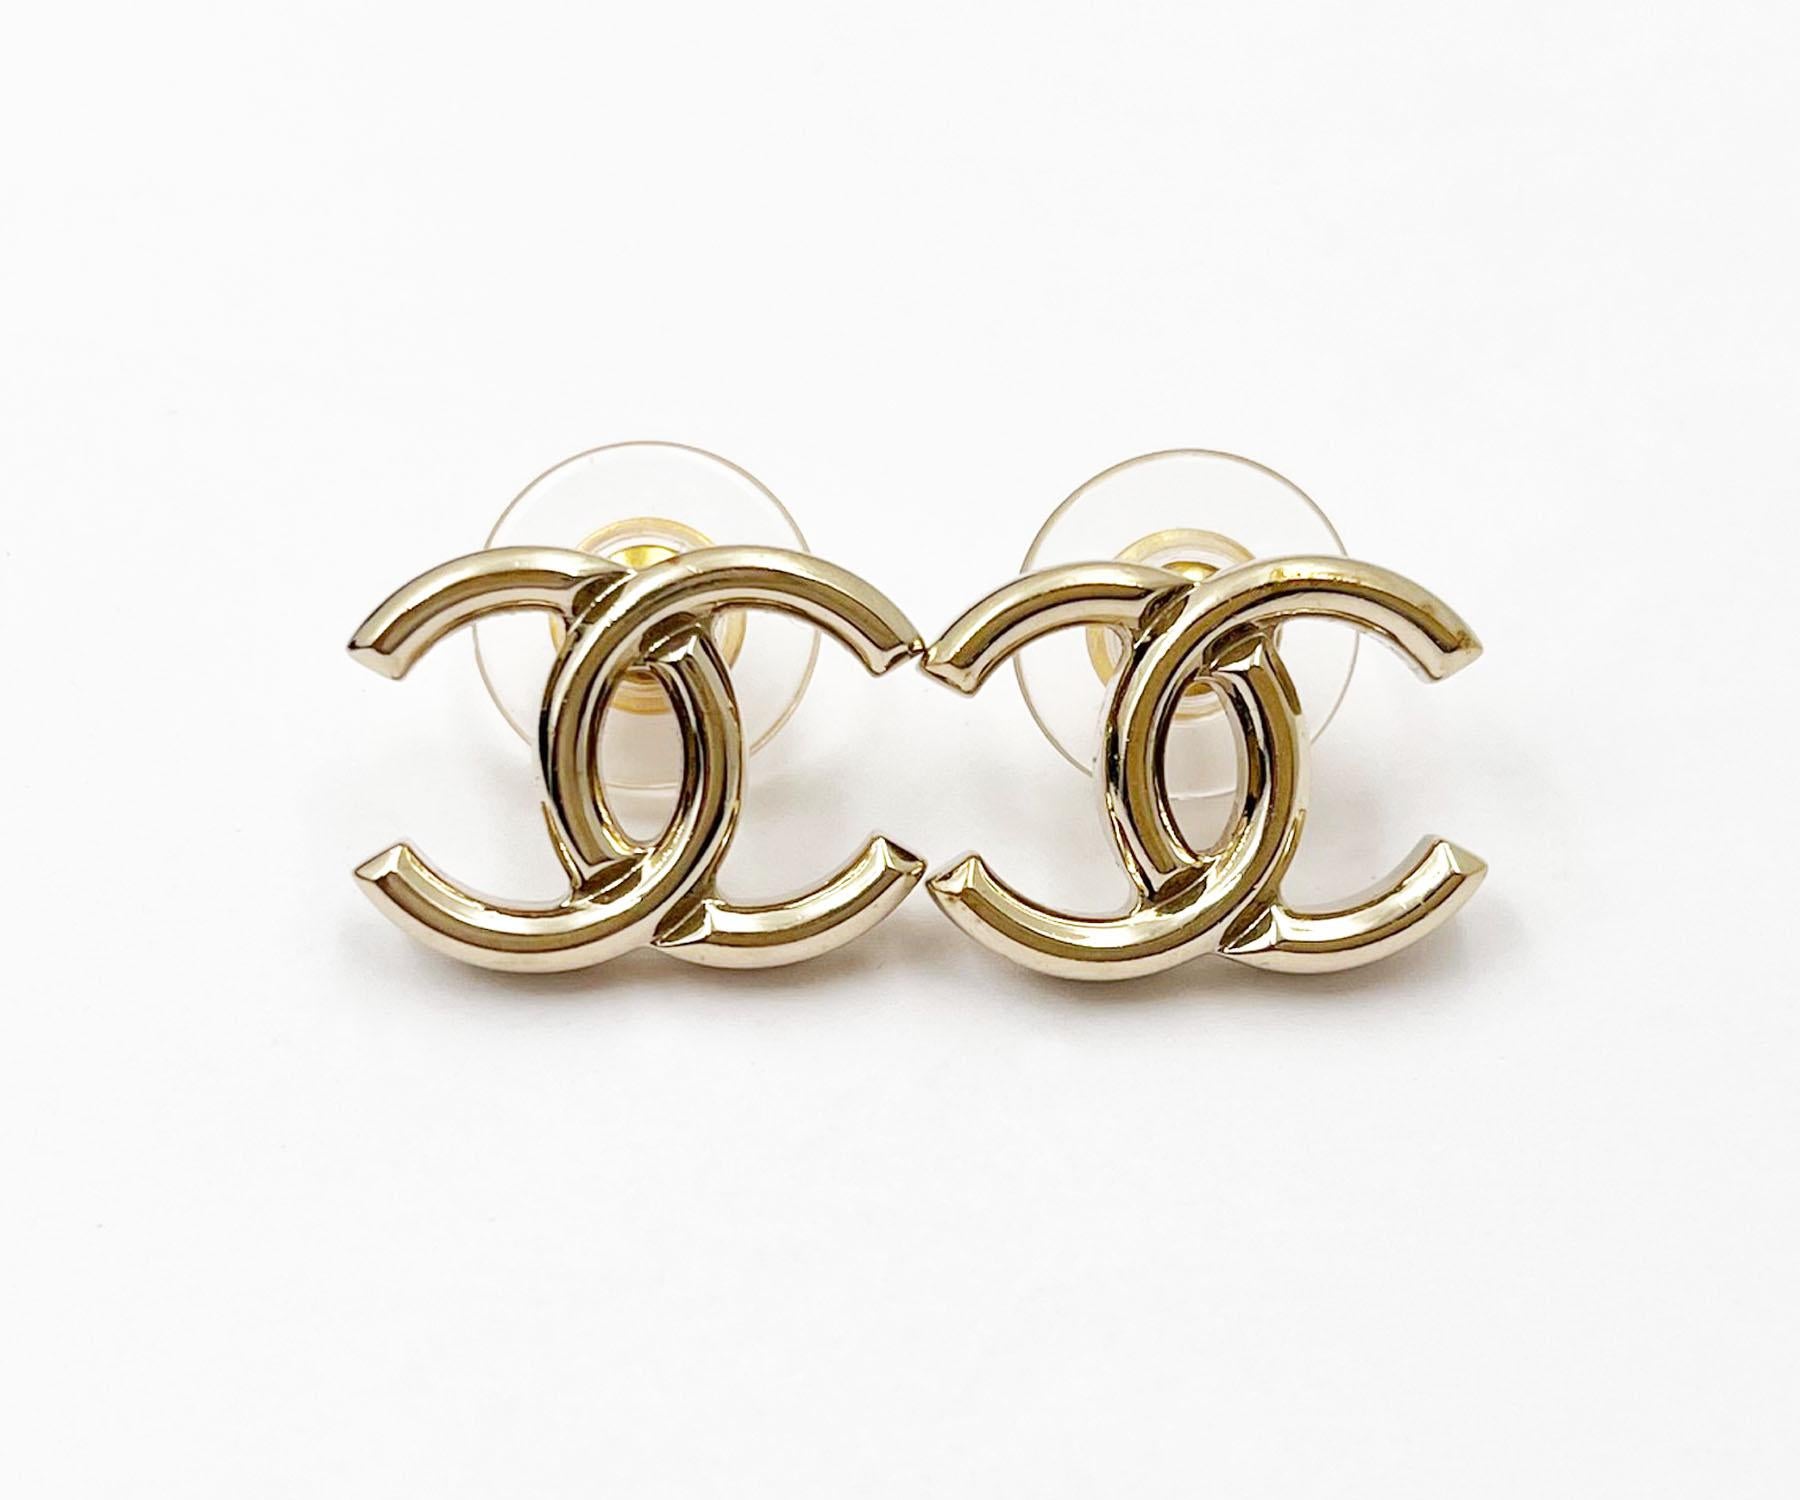 Chanel Classic Gold CC 3D Piercing Earrings

*Marked 17
*Made in Italy

-It is approximately 0.75